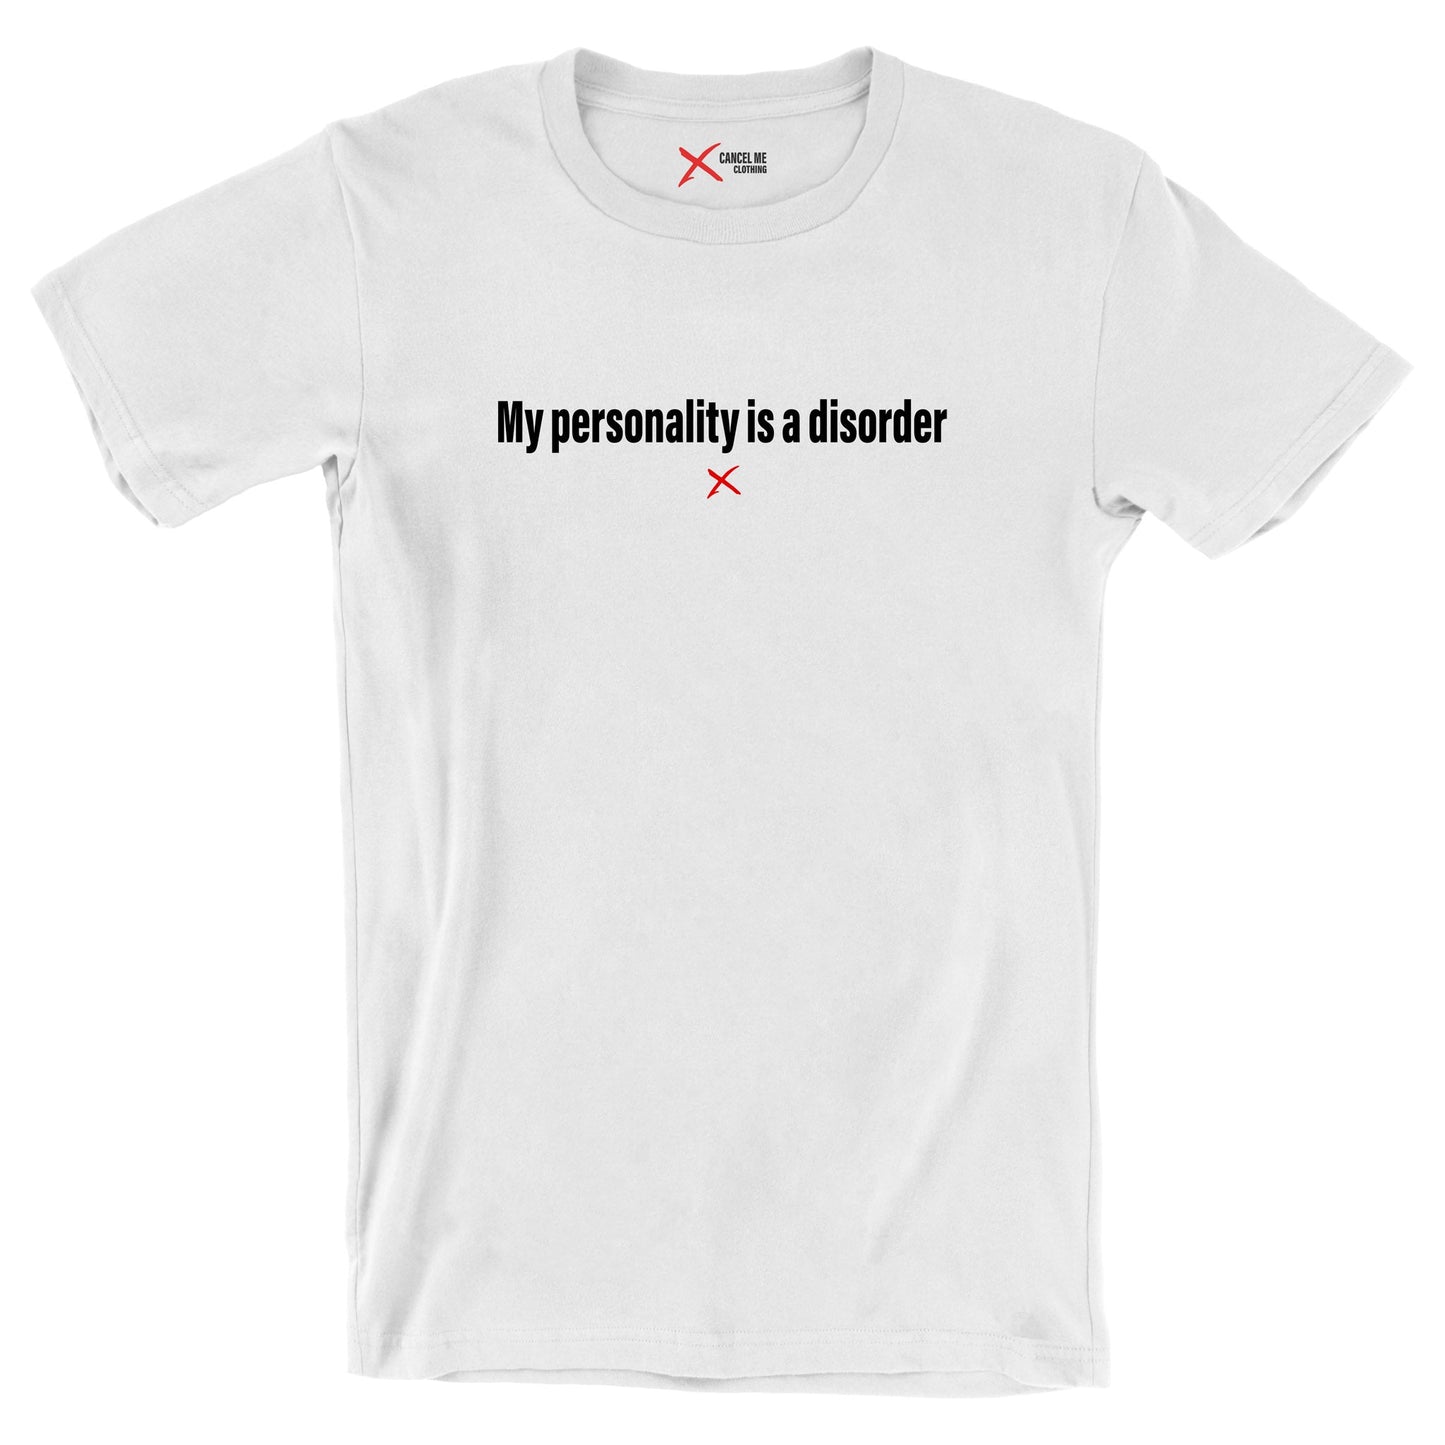 My personality is a disorder - Shirt